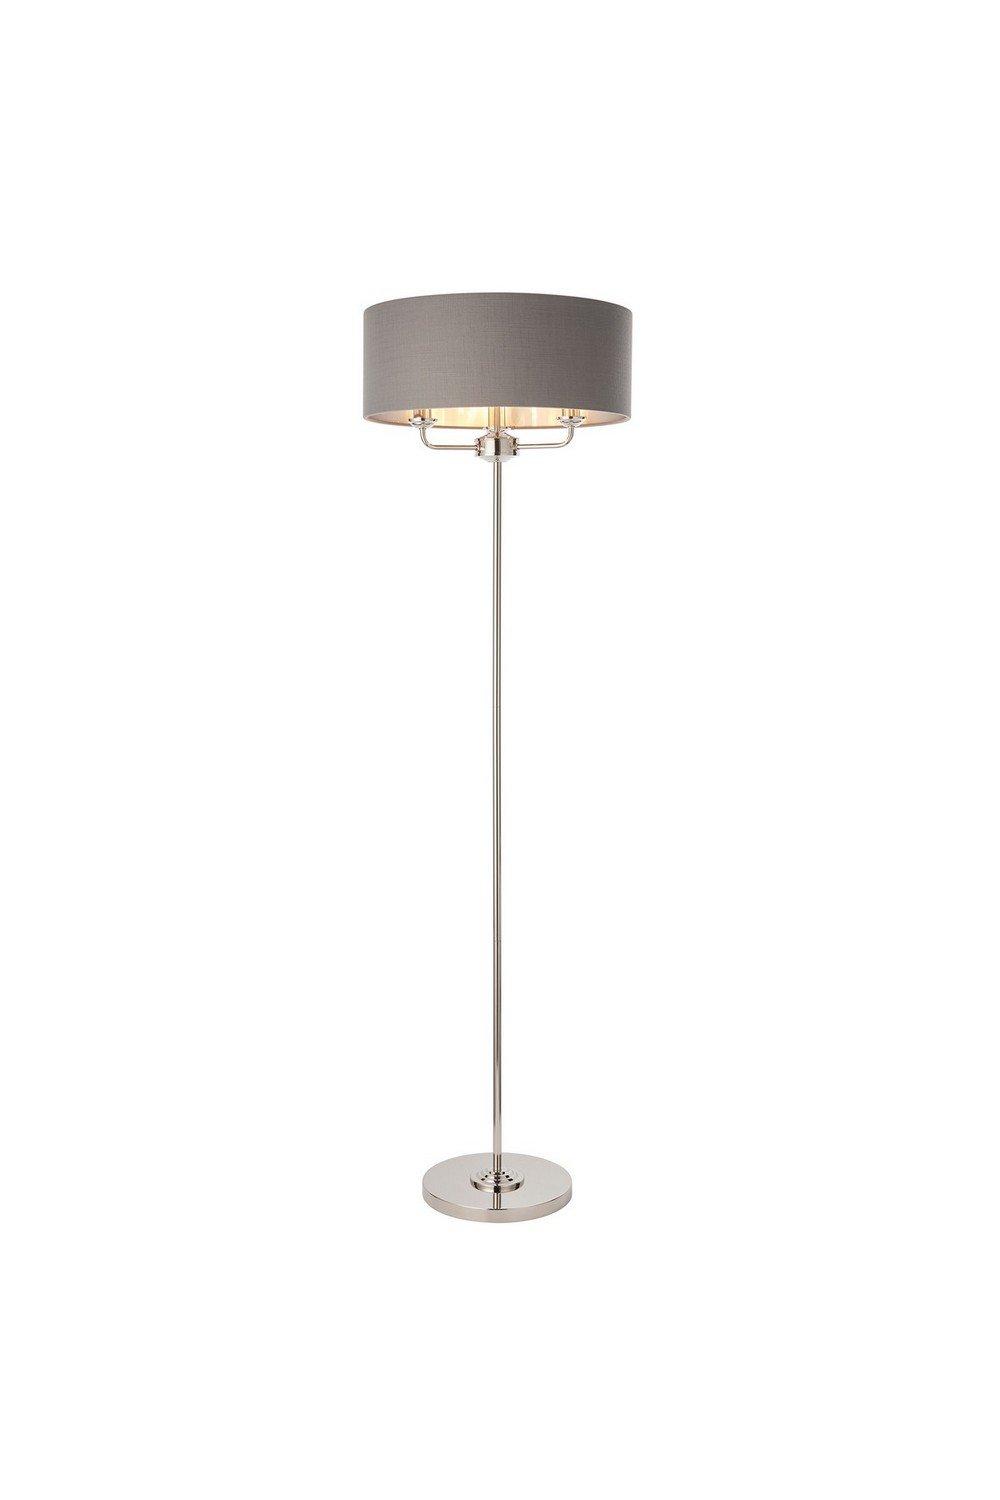 Highclere Floor Lamp Bright Nickel Plate Charcoal Fabric Shade